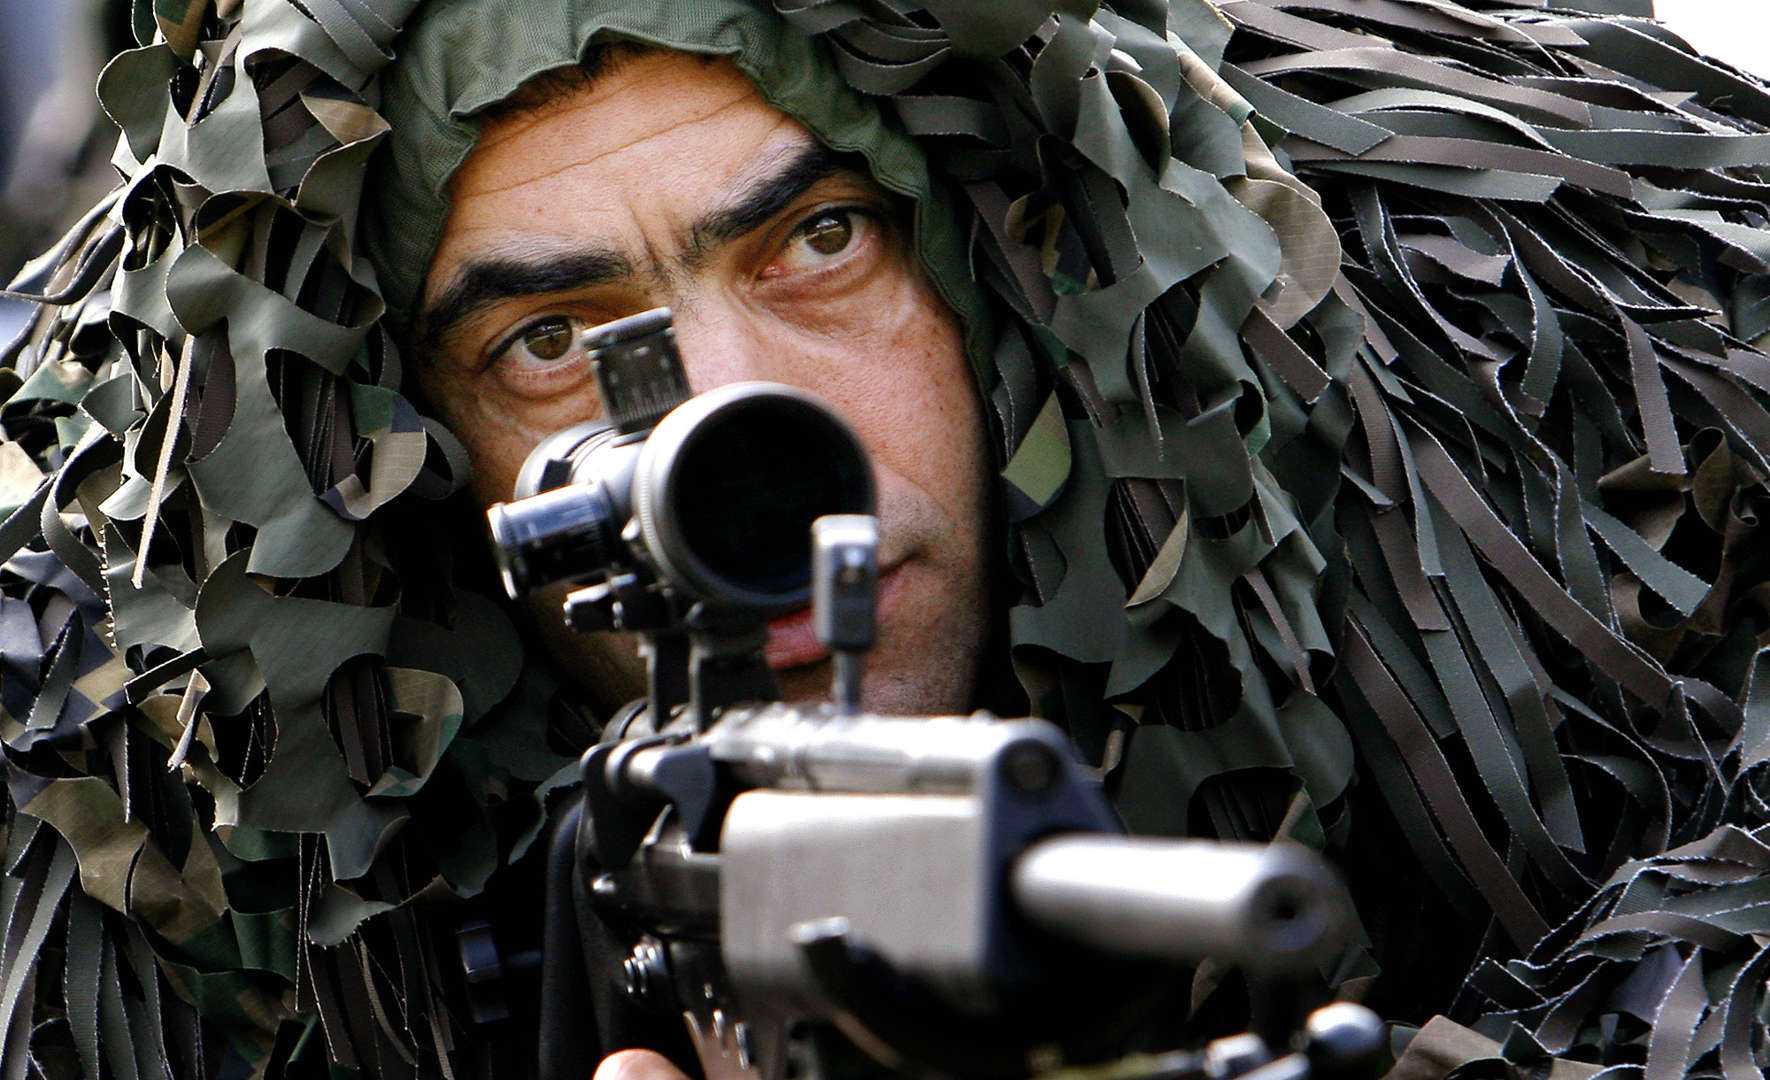 A Romanian special forces sniper looks on during a joint practice session involving Interior Ministry troops on the outskirts of Bucharest Romania Wednesday March 12 2008. The exercise is part of preparations by all branches of the Romanian security services for the upcoming NATO Summit that will take place in Bucharest between April 2-4 2008.(